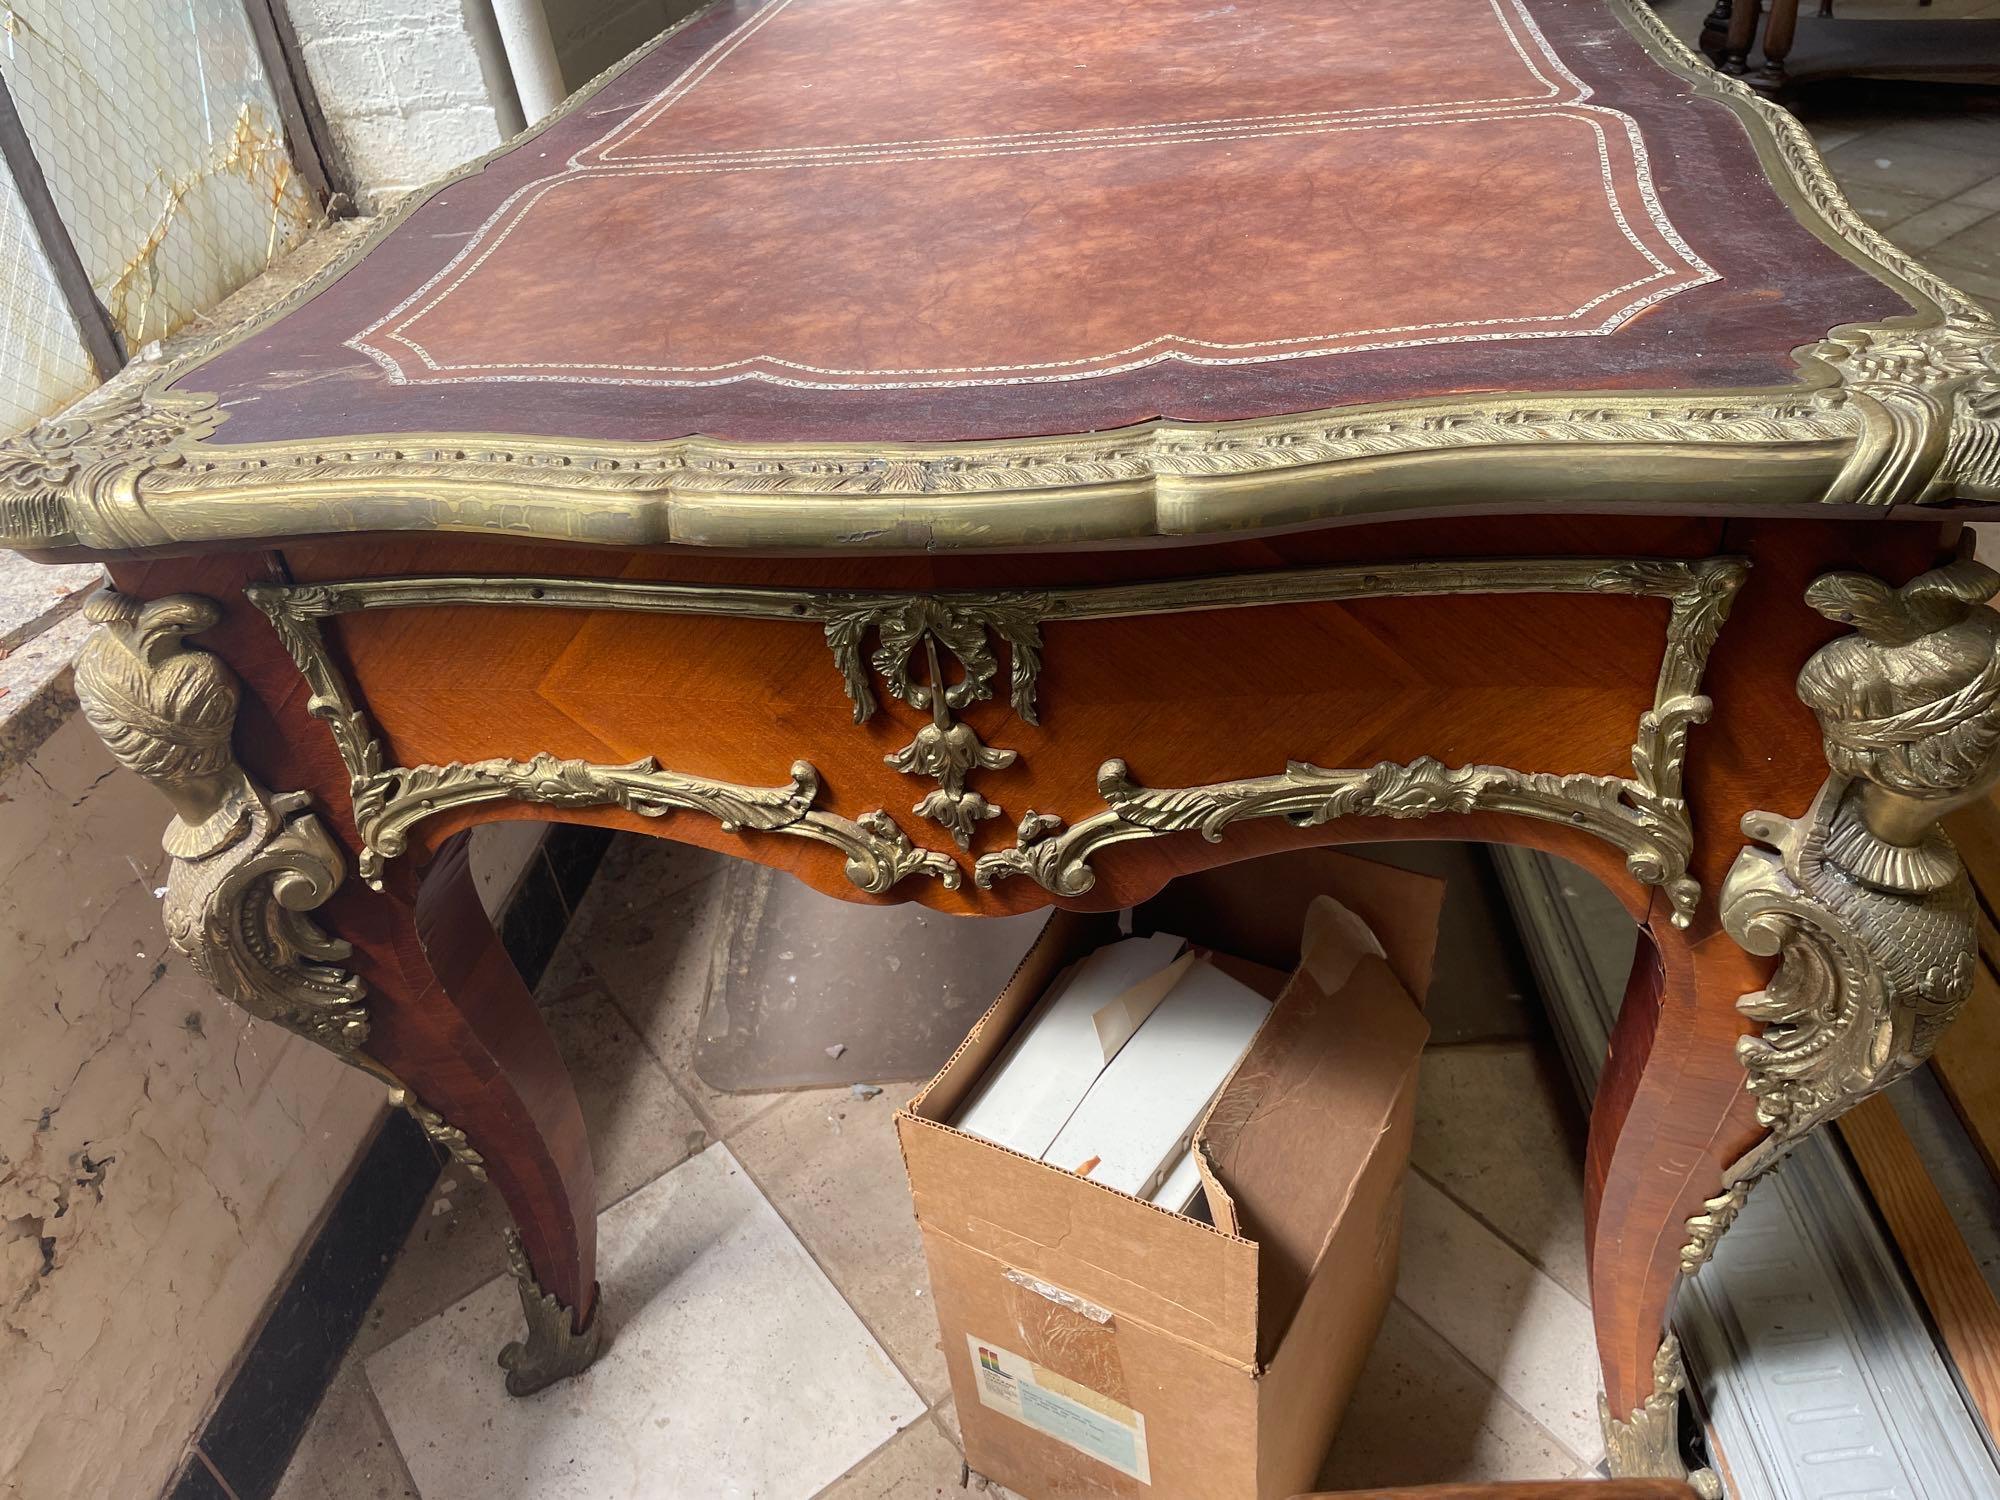 1960s French Louis XV Style Ornate Carved Wood Desk With Figural Accents and Leather Inlaid Top